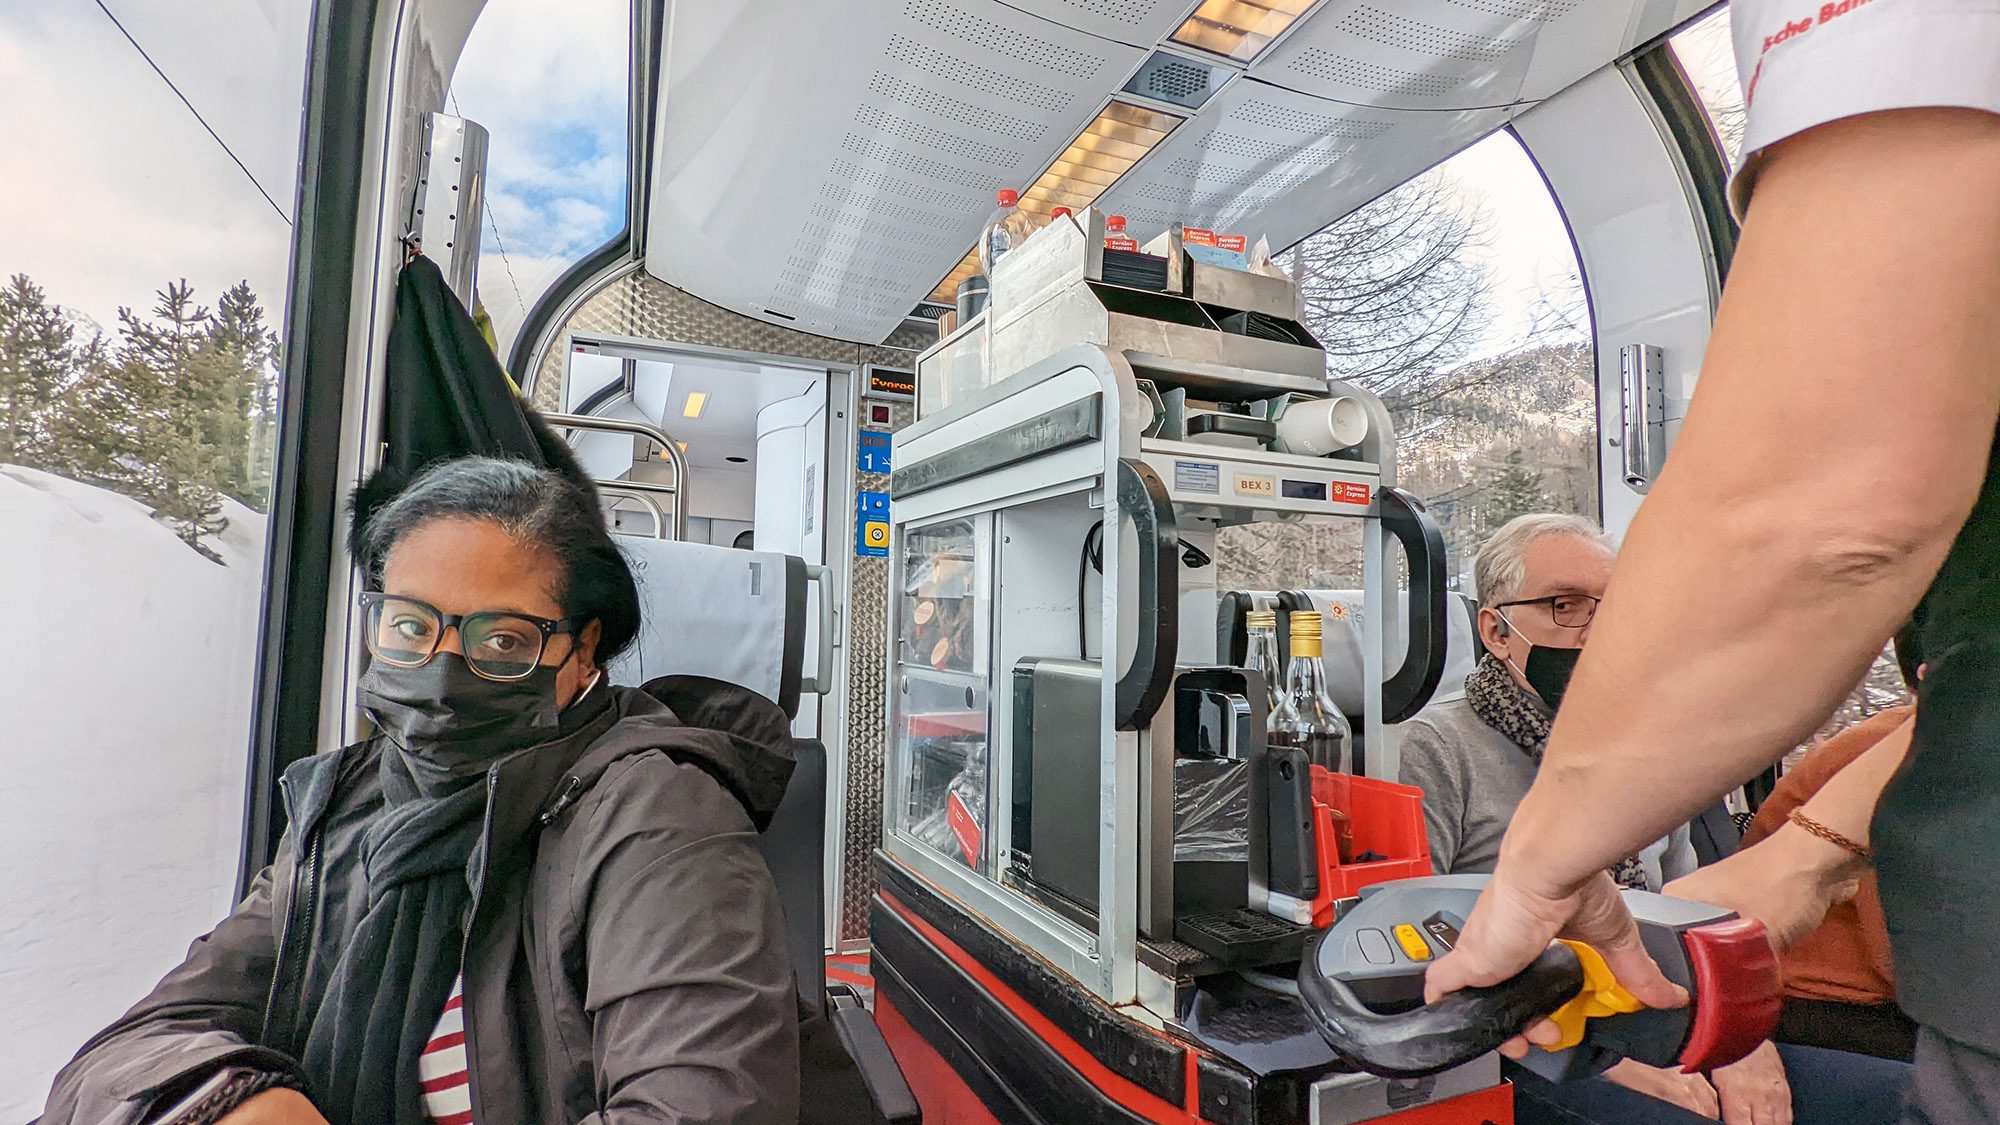 Bernina Express: 14 Things You Need To Know Before Riding | Grounded ...